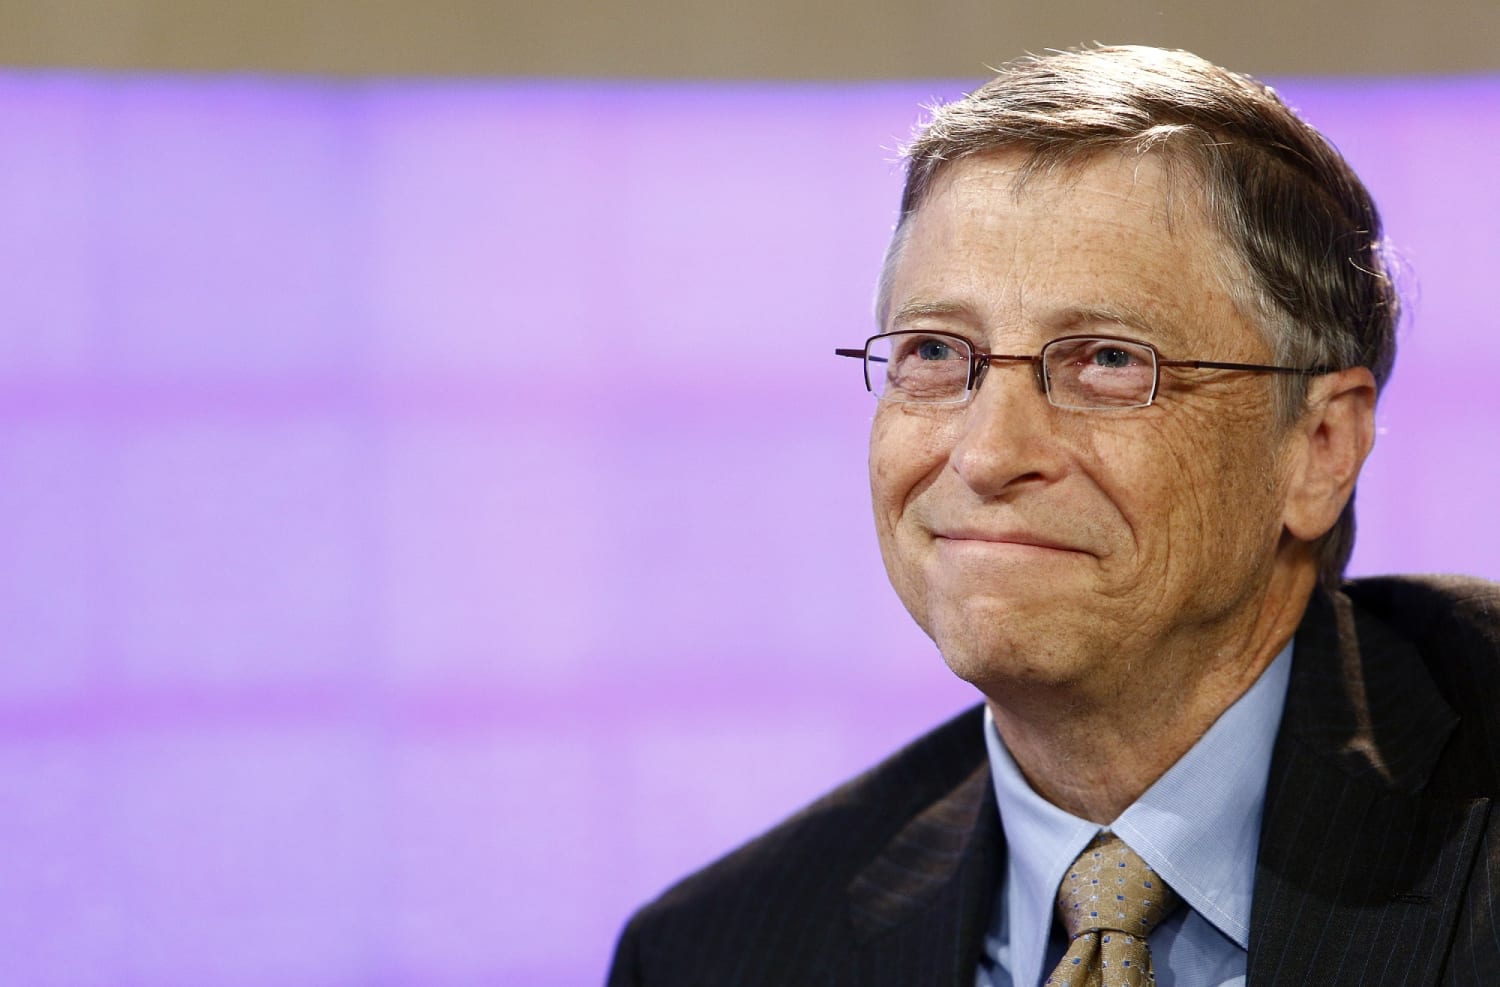 The business book Bill Gates is recommending to friends and colleagues right now